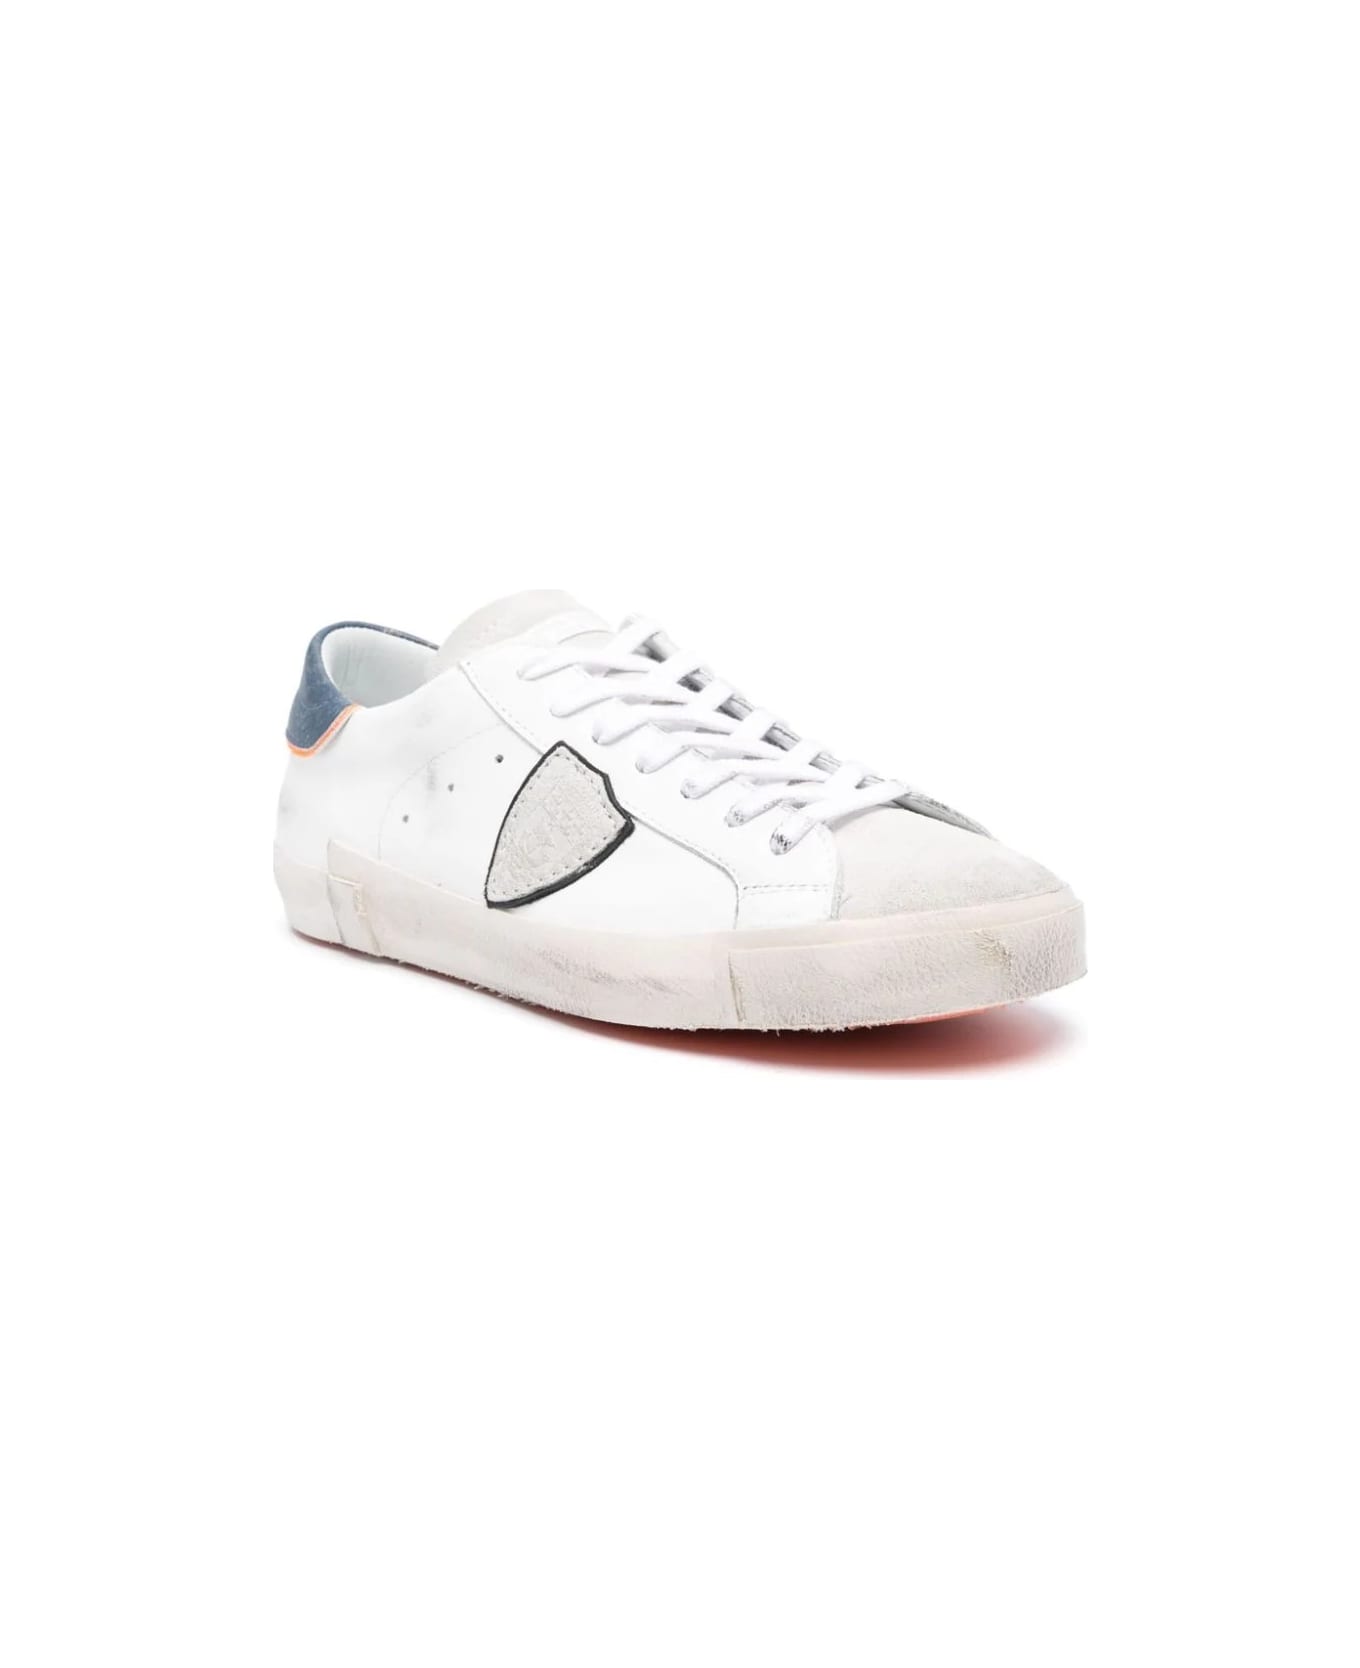 Philippe Model Prsx Low Sneakers - White, Blue And Orange - White